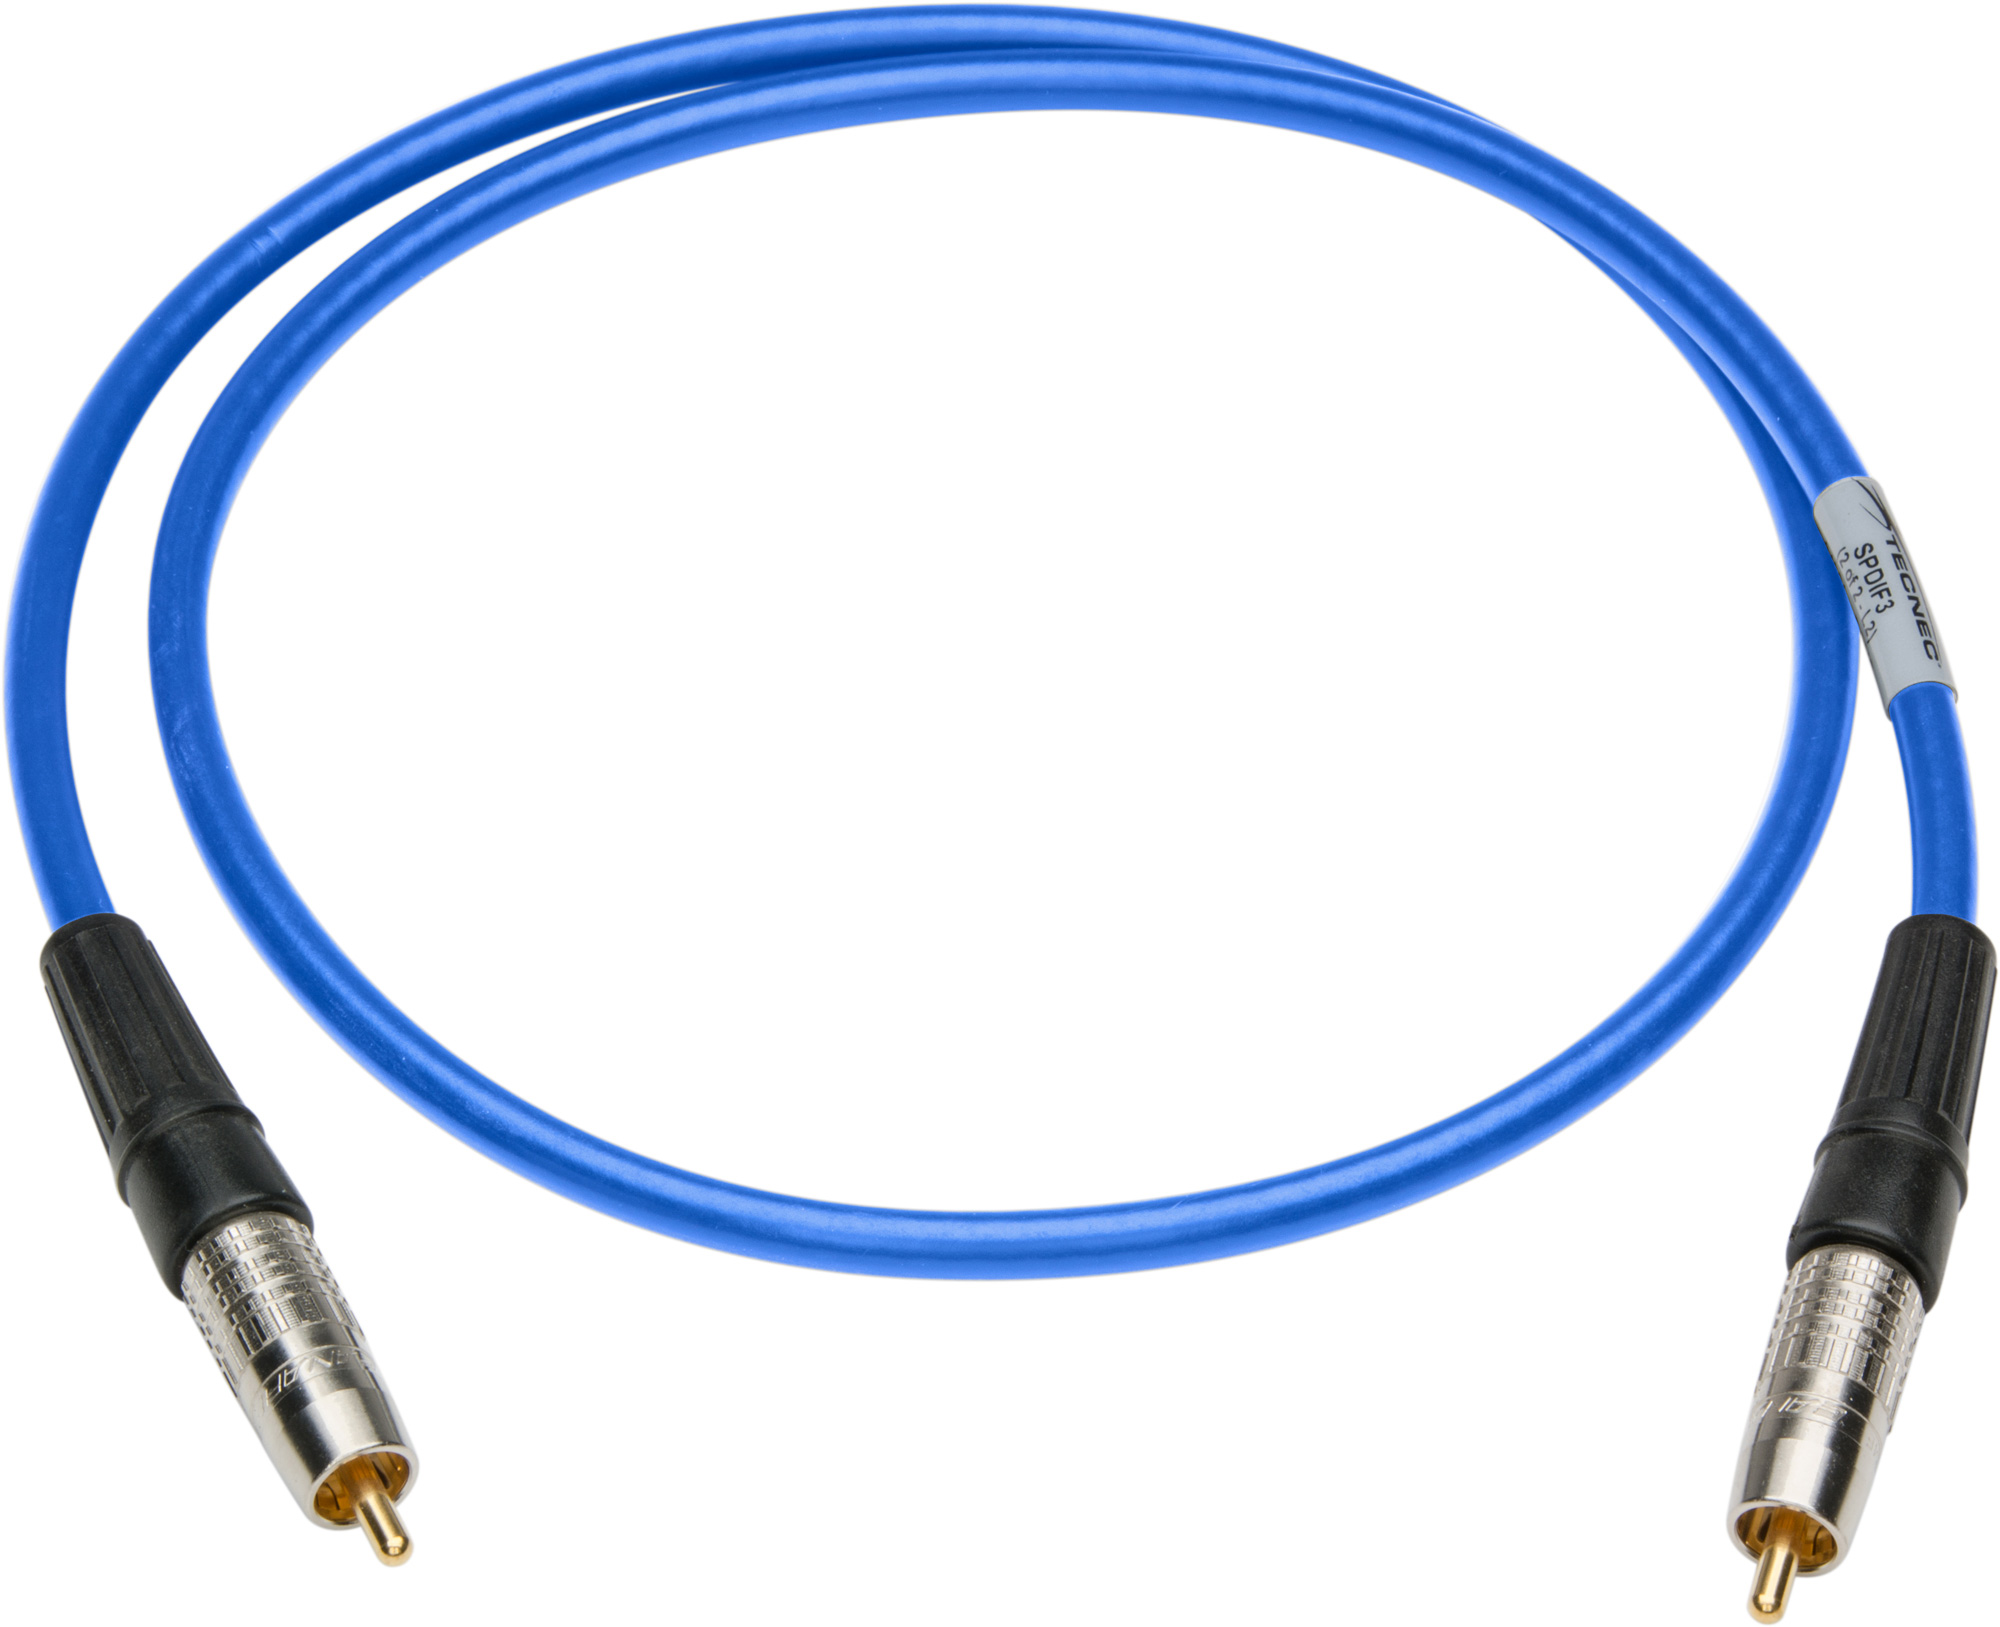 40 Foot SPDIF RCA Male to Male Digital Audio Cable - BLUE SPDIF40BE